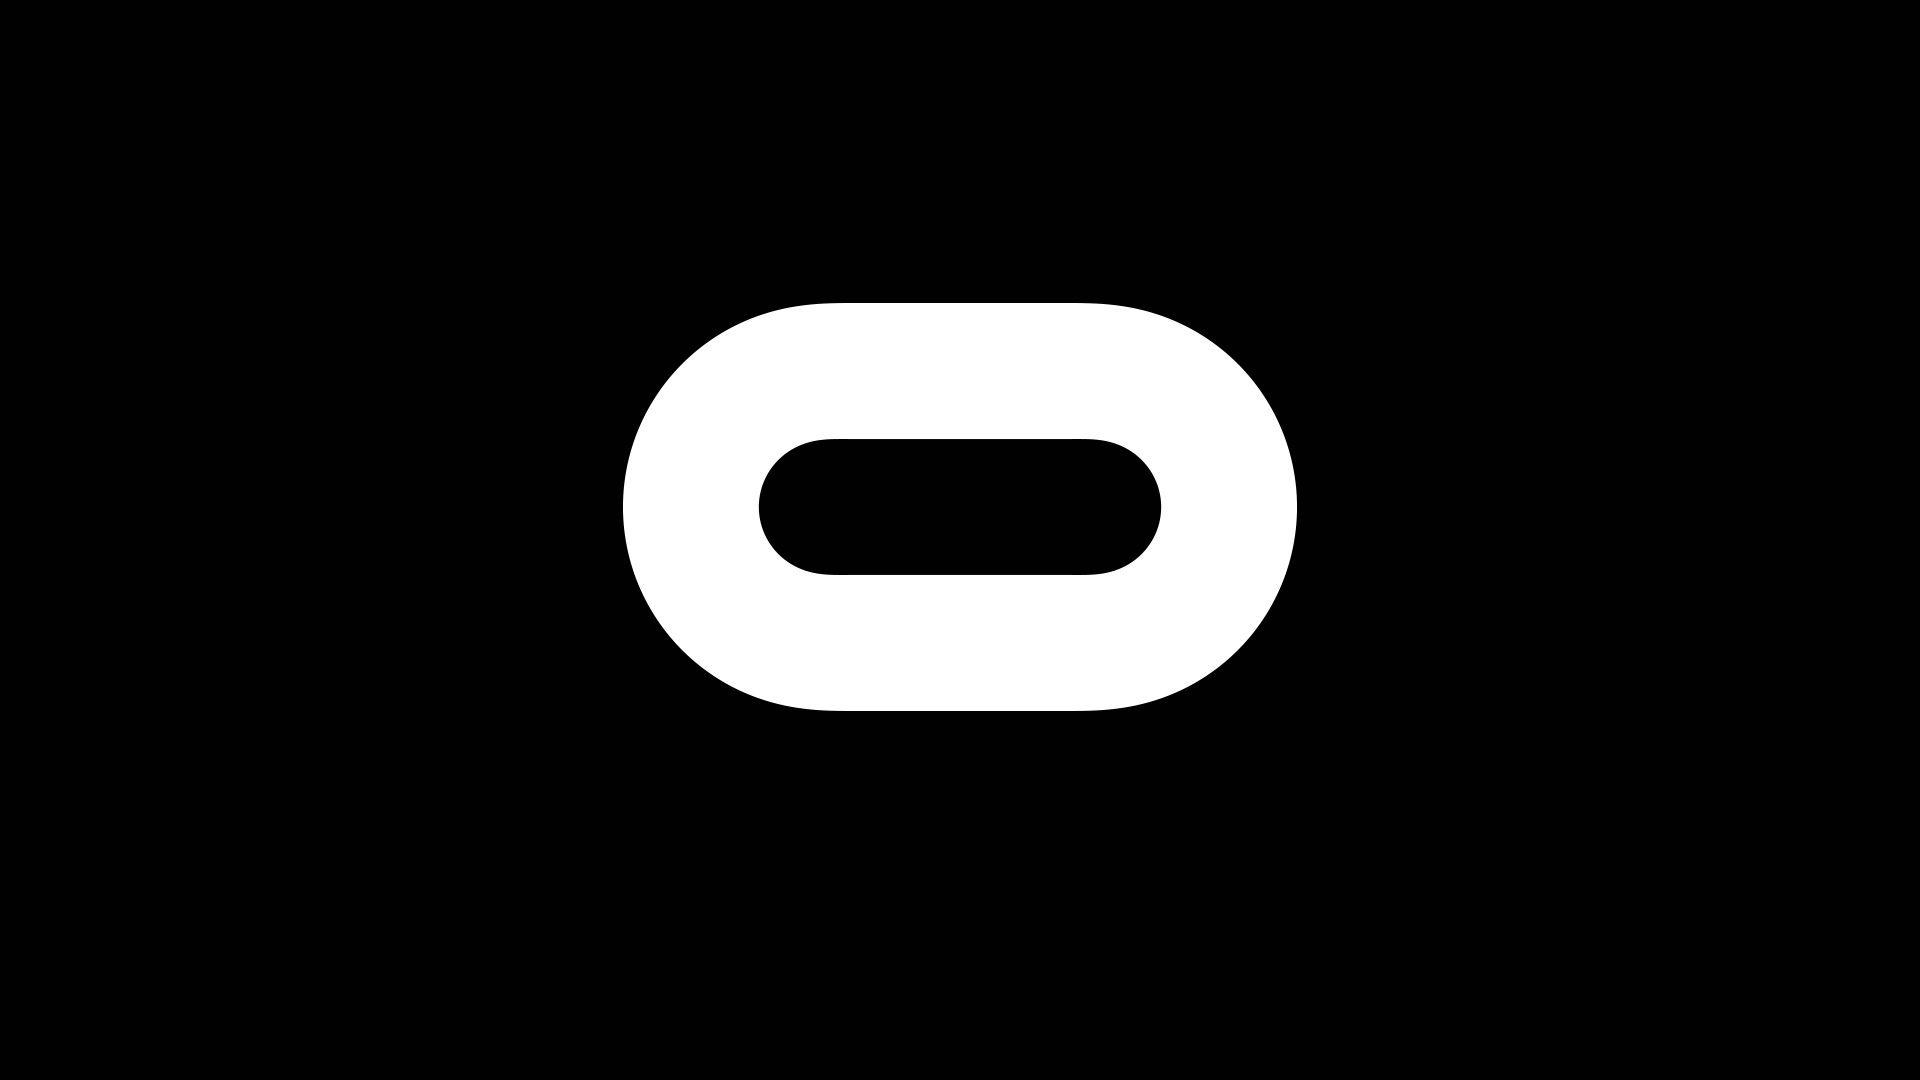 Oculus Rift Wallpapers, Pictures, Image